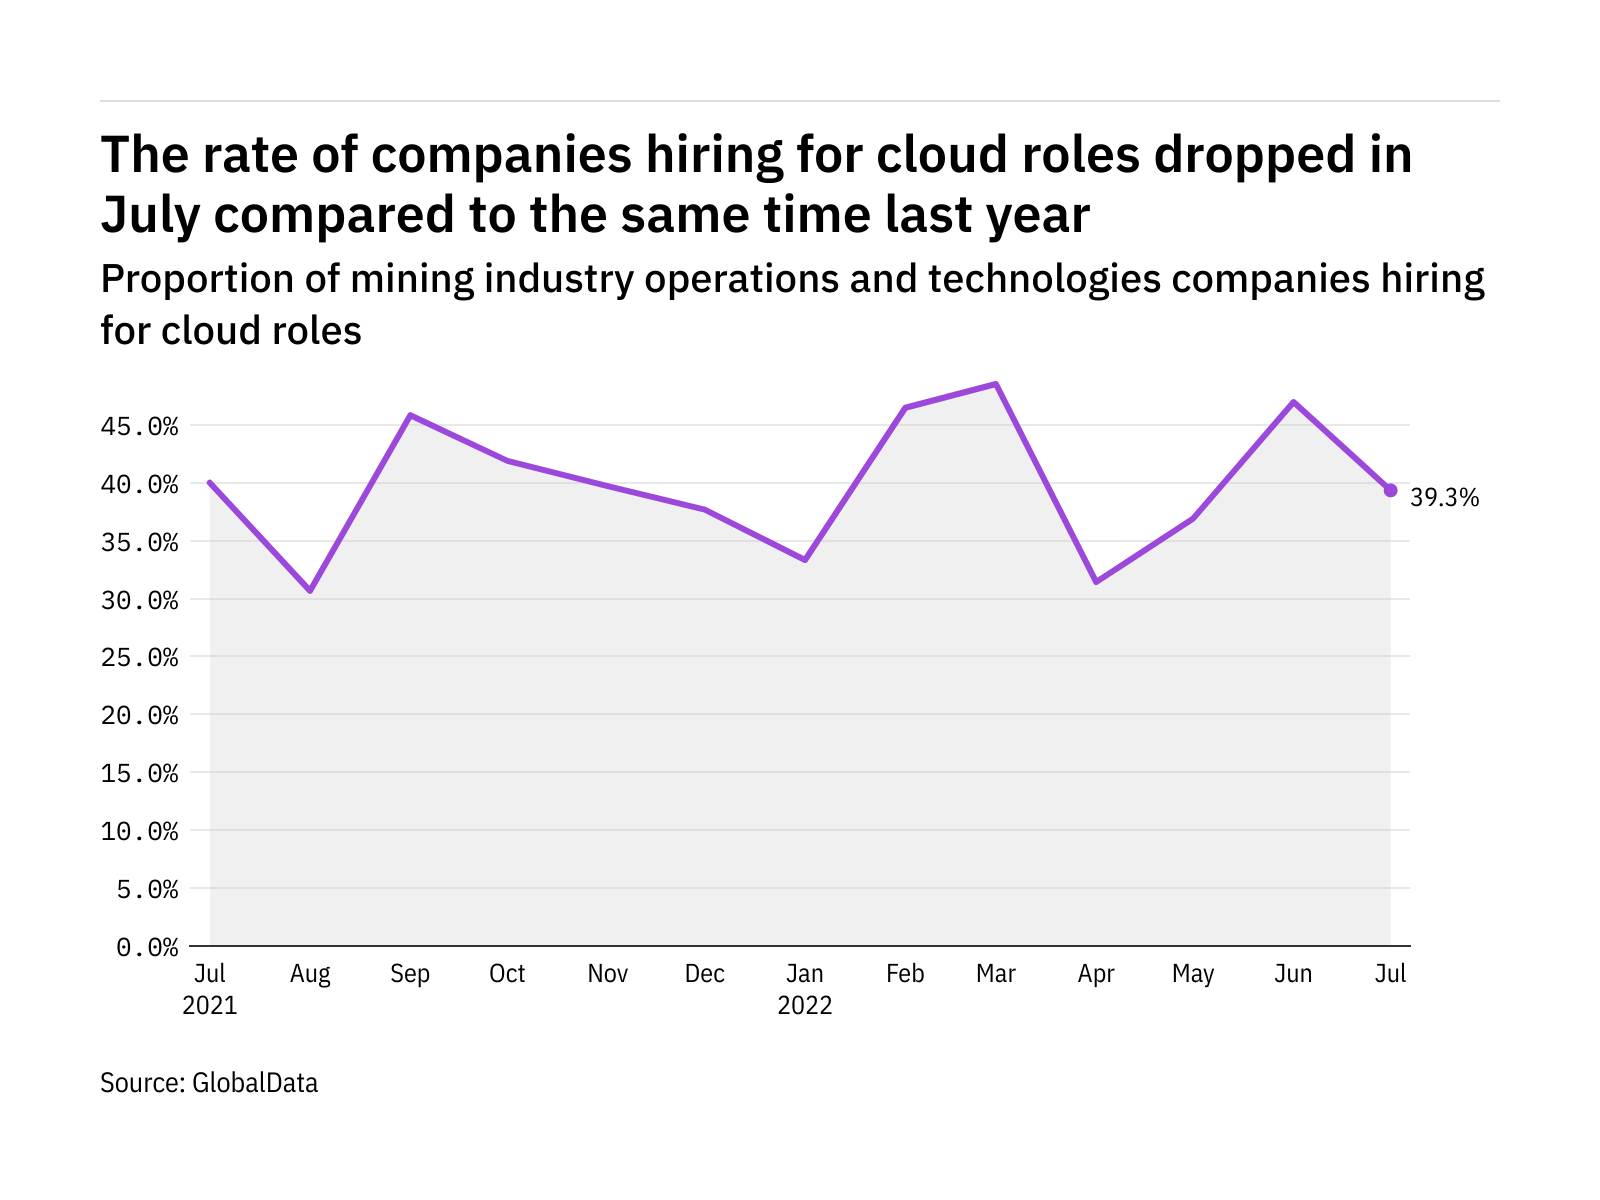 Cloud hiring levels in the mining industry dropped in July 2022